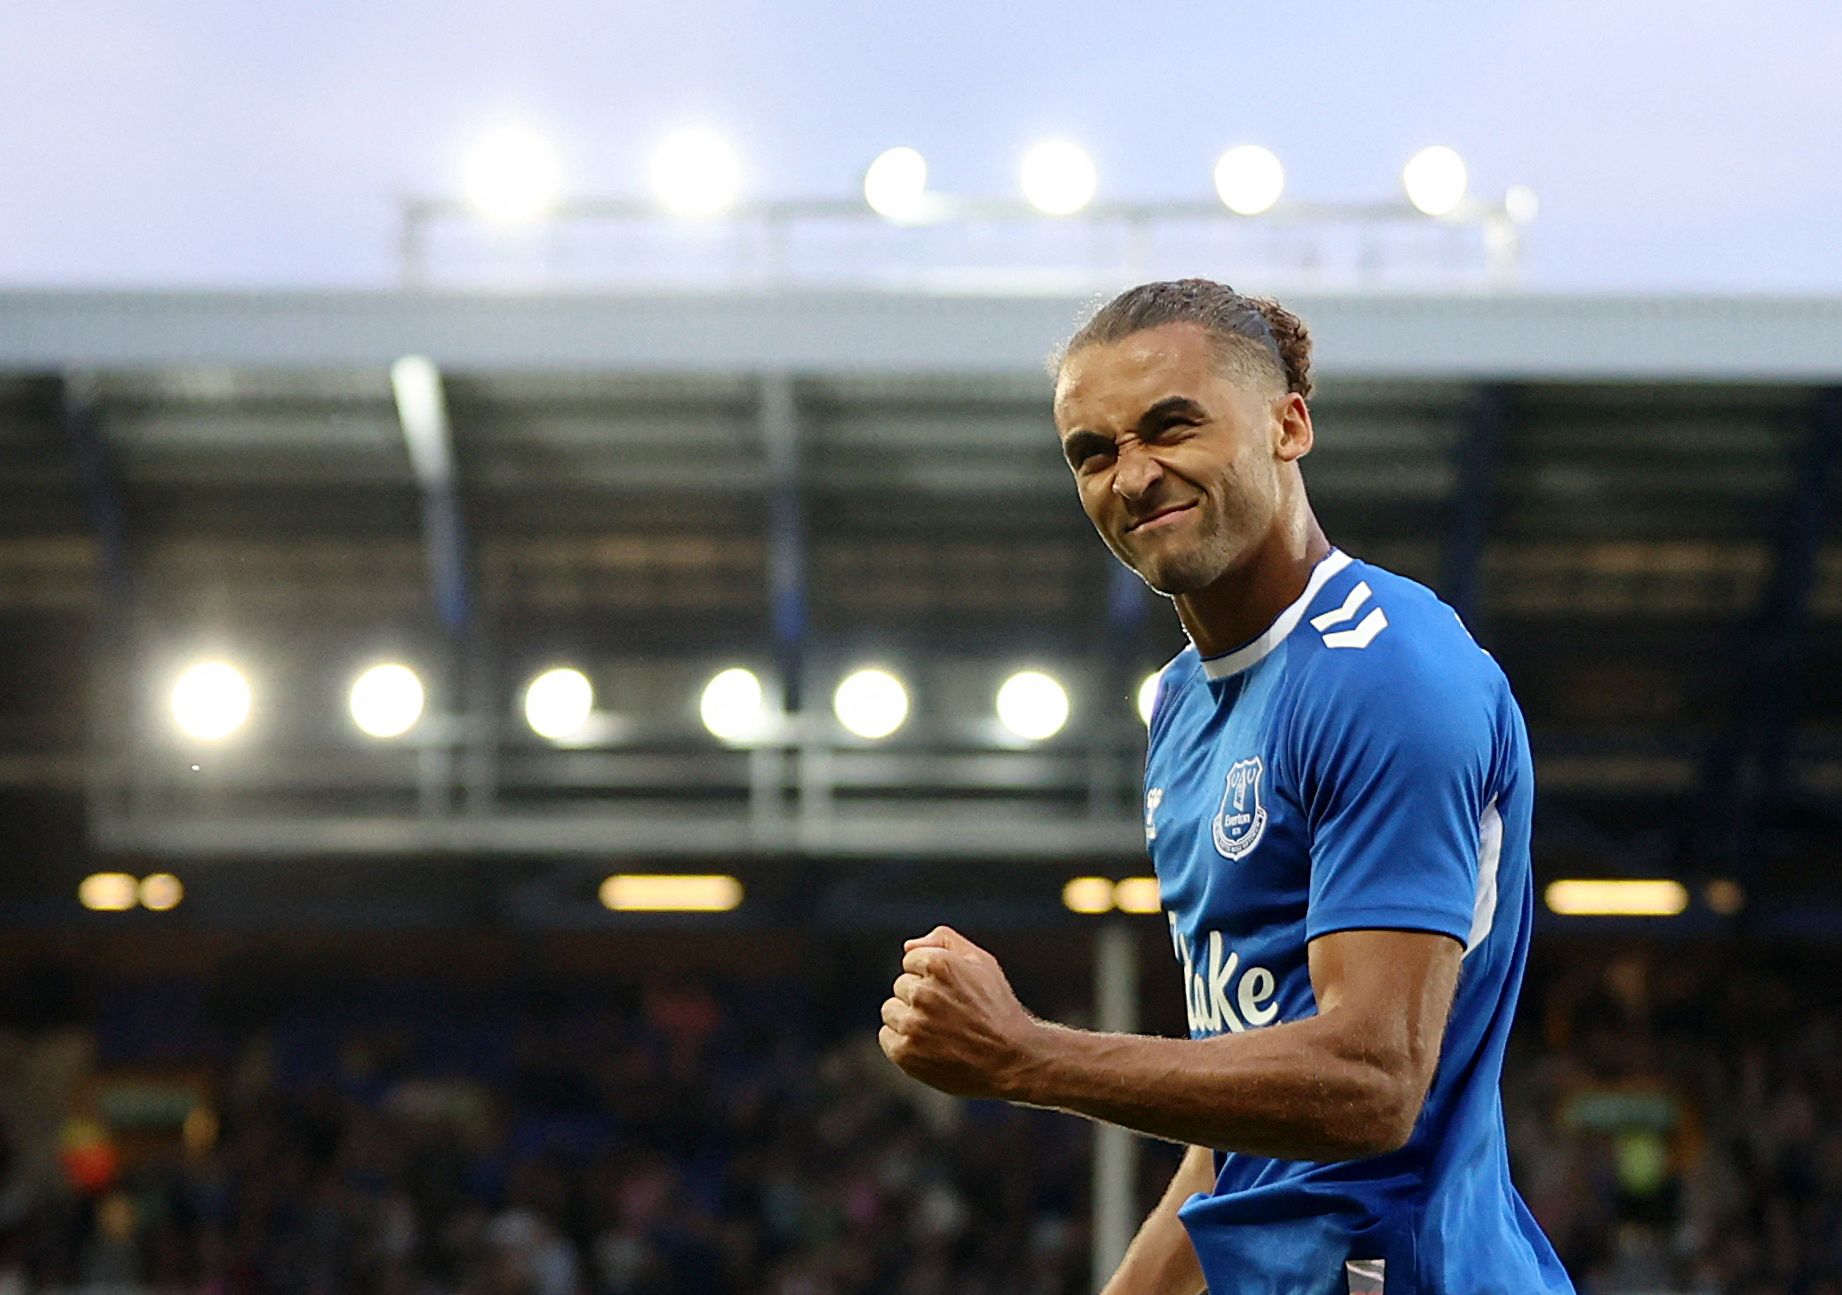 Soccer Football - Pre Season Friendly - A match for peace and the end of war in Ukraine - Everton v Dynamo Kyiv - Goodison Park, Liverpool, Britain - July 29, 2022 Everton's Dominic Calvert-Lewin celebrates scoring their first goal Action Images via Reuters/Molly Darlington